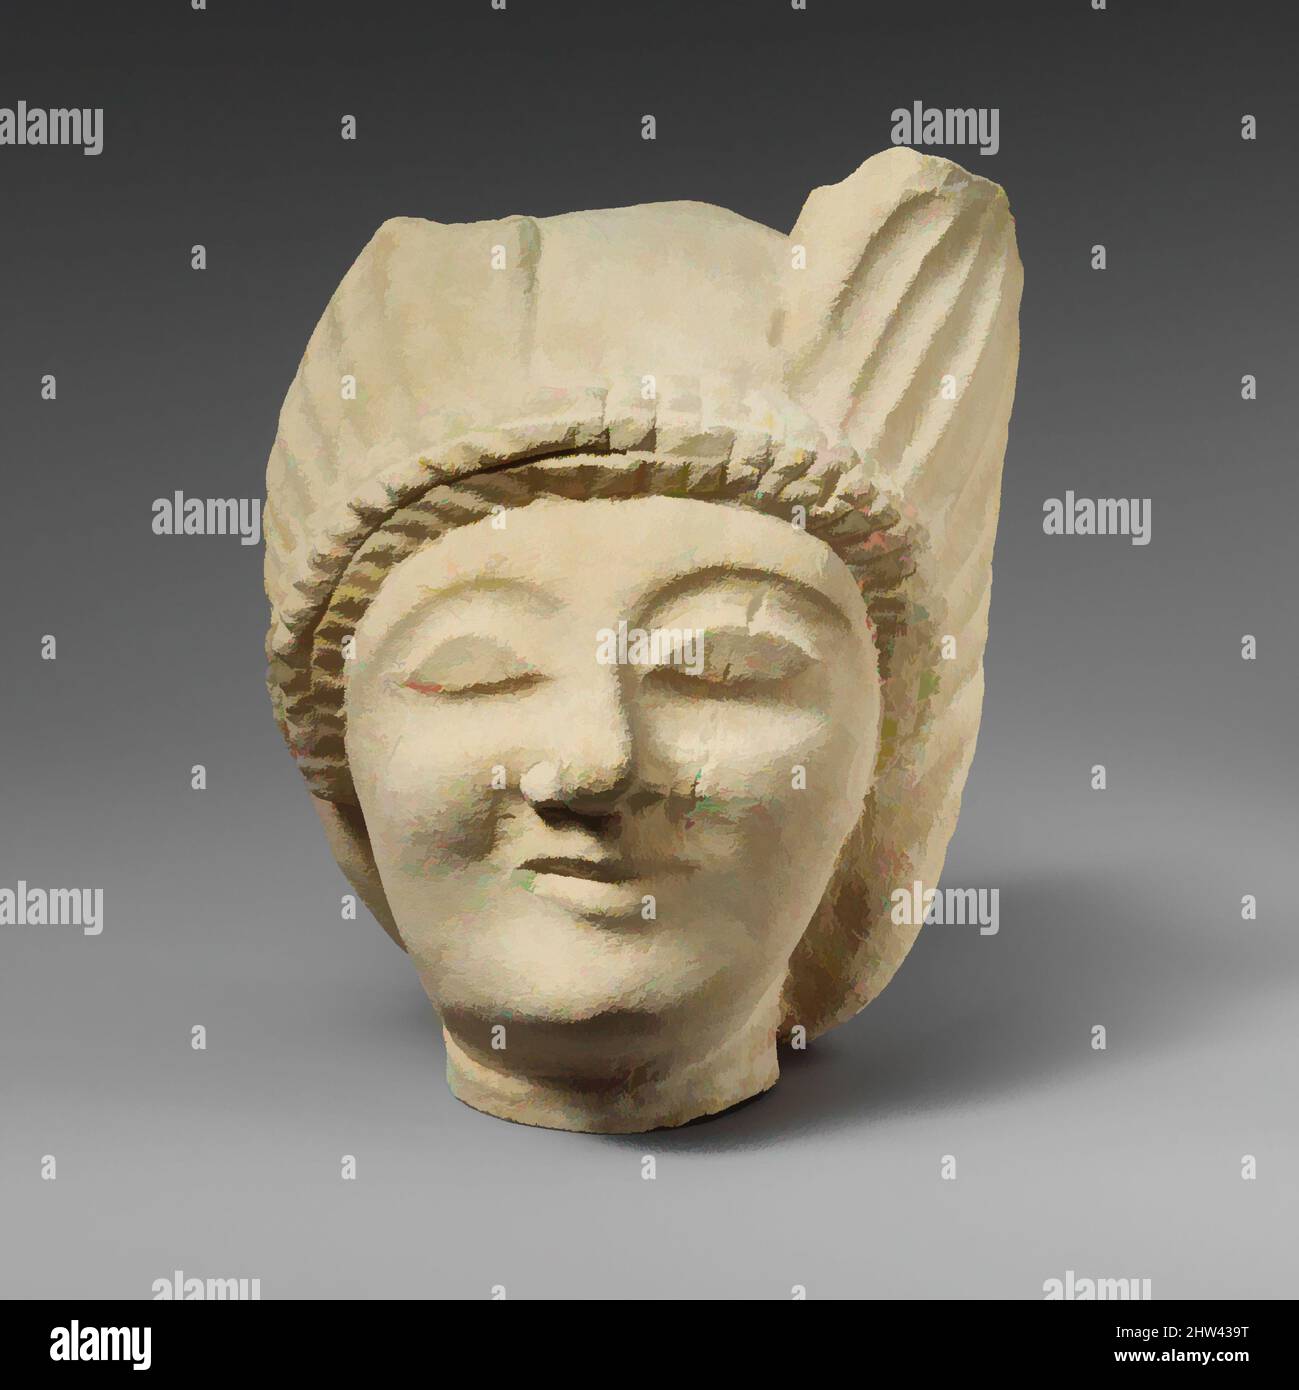 Art inspired by Limestone head of the god Hermes (?), Archaic, early 5th century B.C., Cypriot, Limestone, Overall: 5 7/8 x 4 3/16 x 5 3/4 in. (14.9 x 10.6 x 14.6 cm), Stone Sculpture, The smiling, youthful face has a pointed nose and flat eyeballs with no eyelids indicated, Classic works modernized by Artotop with a splash of modernity. Shapes, color and value, eye-catching visual impact on art. Emotions through freedom of artworks in a contemporary way. A timeless message pursuing a wildly creative new direction. Artists turning to the digital medium and creating the Artotop NFT Stock Photo